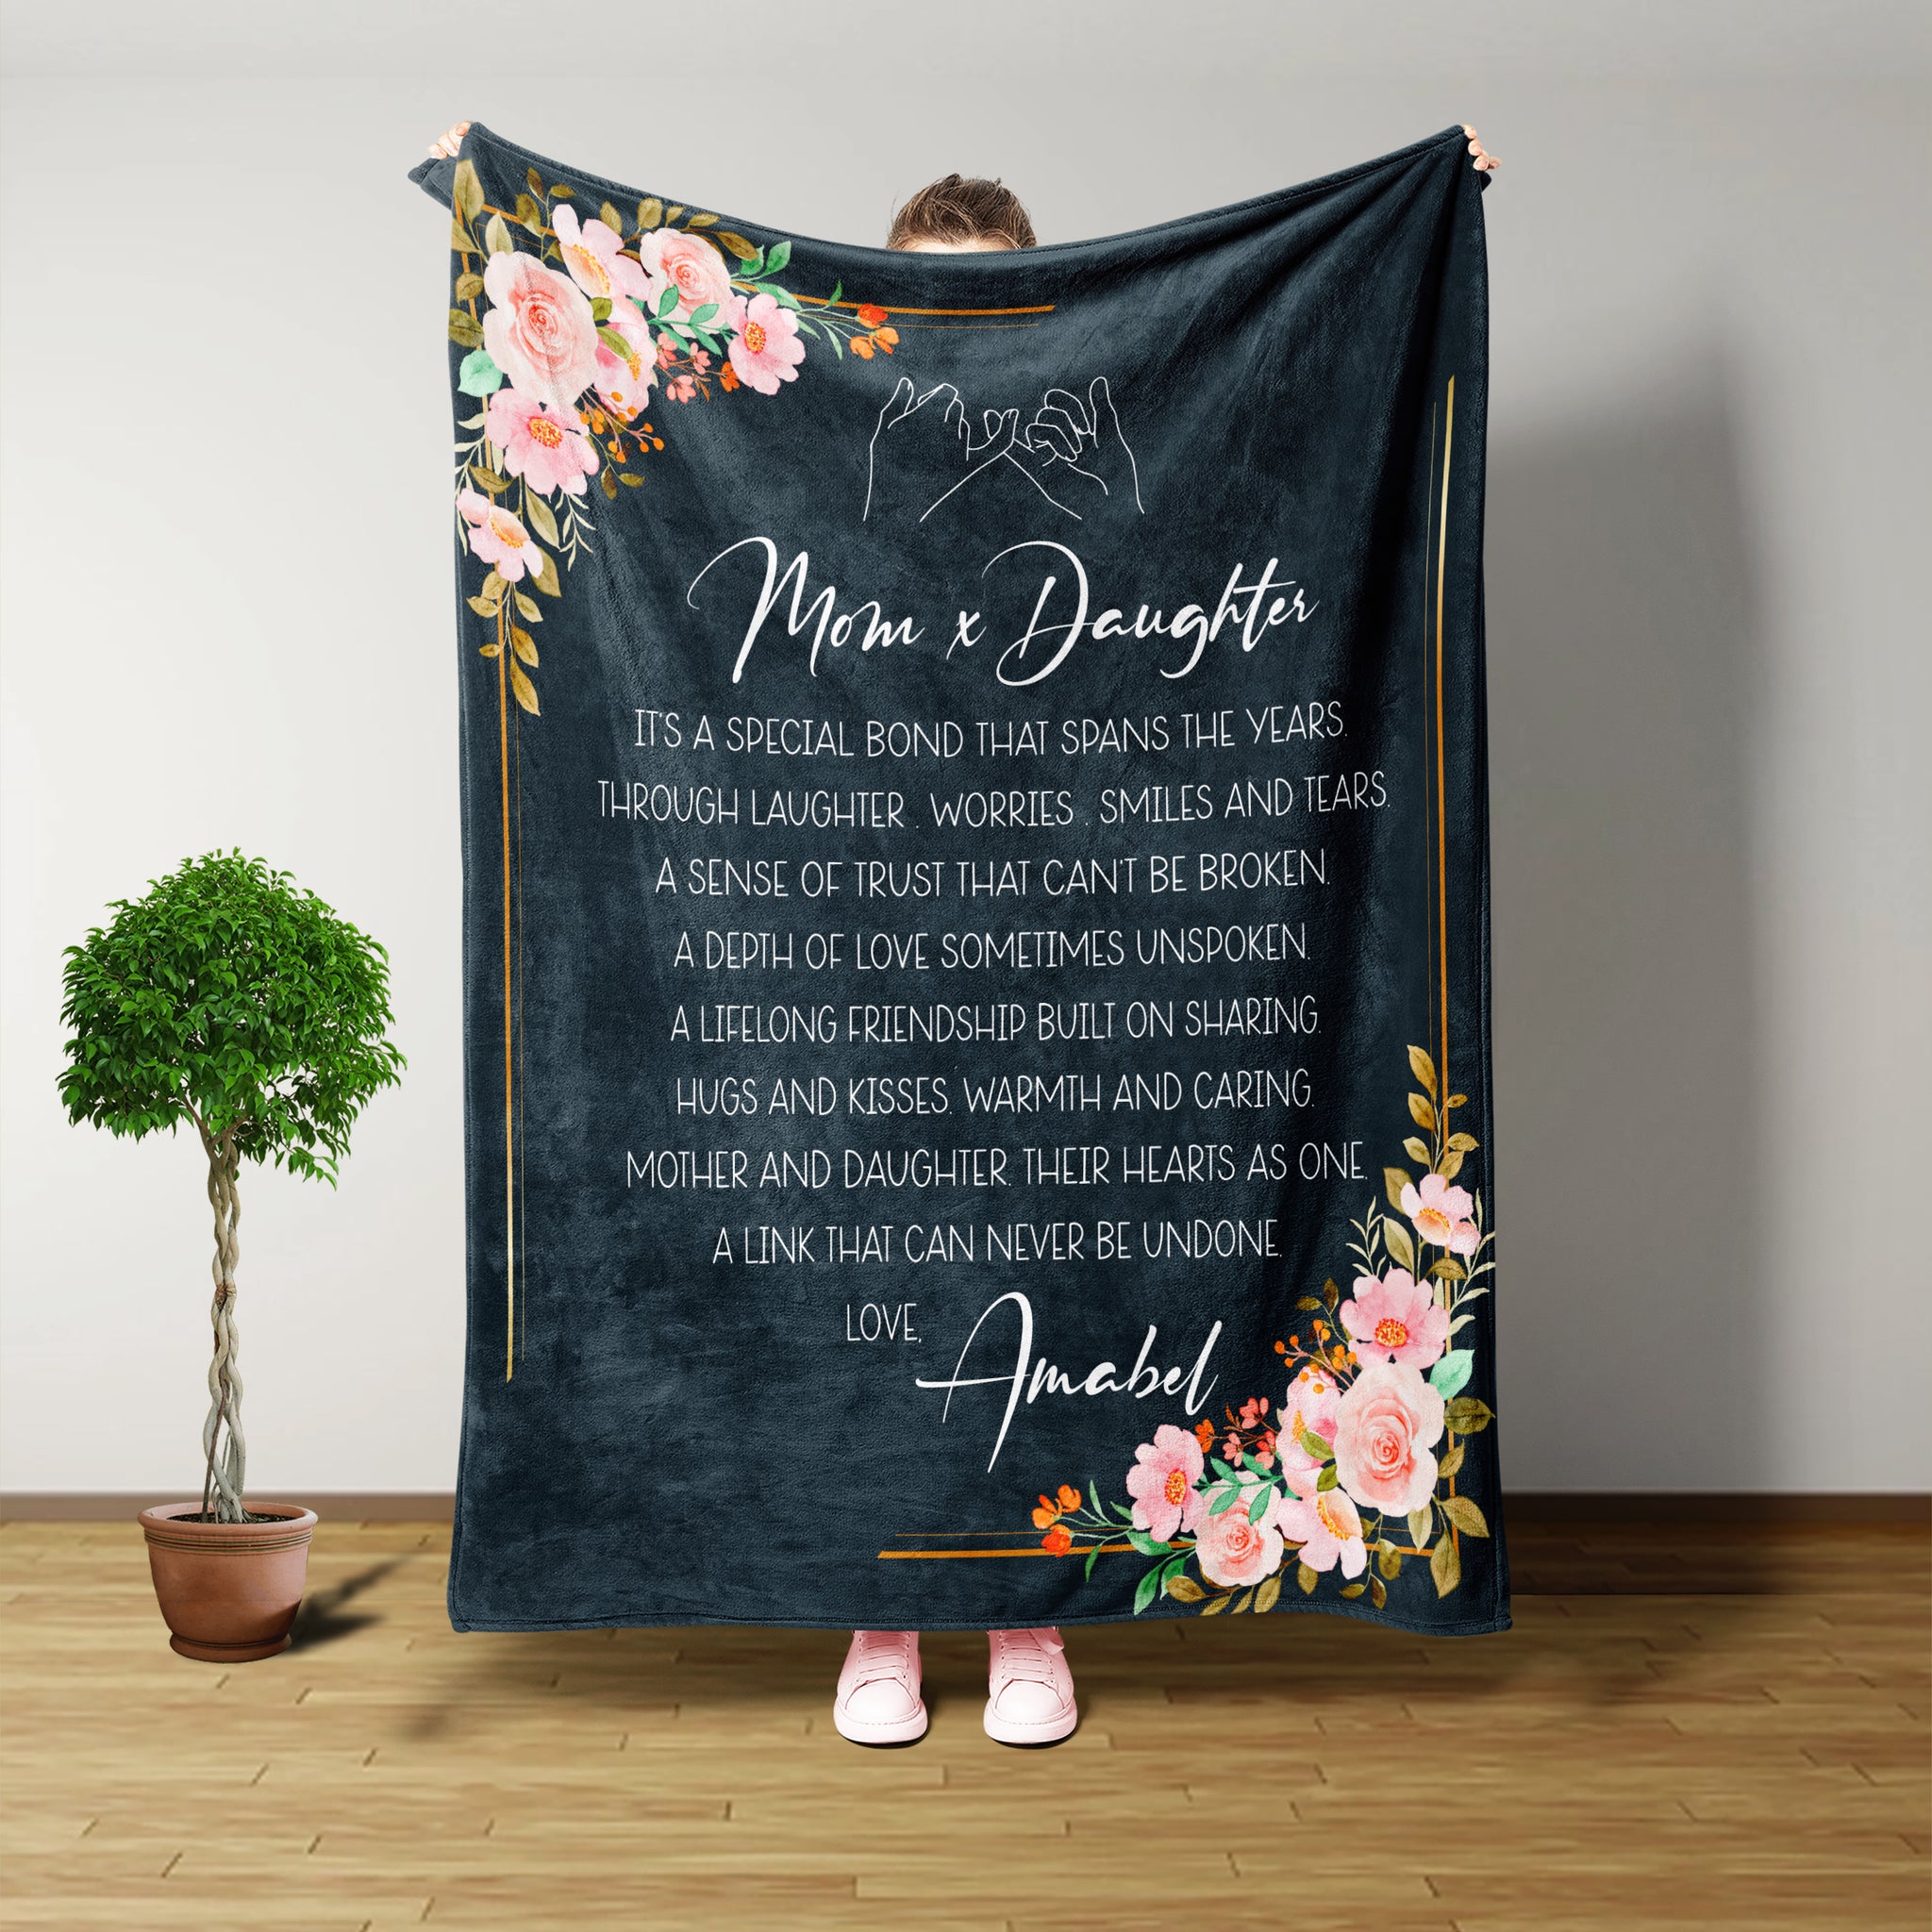 Blanket Design, Mom And Daughter It's A Special Bond, Daughter Gift From Mom, Birthday Gifts For Women, Flower Garden, Fall Throw Blanket